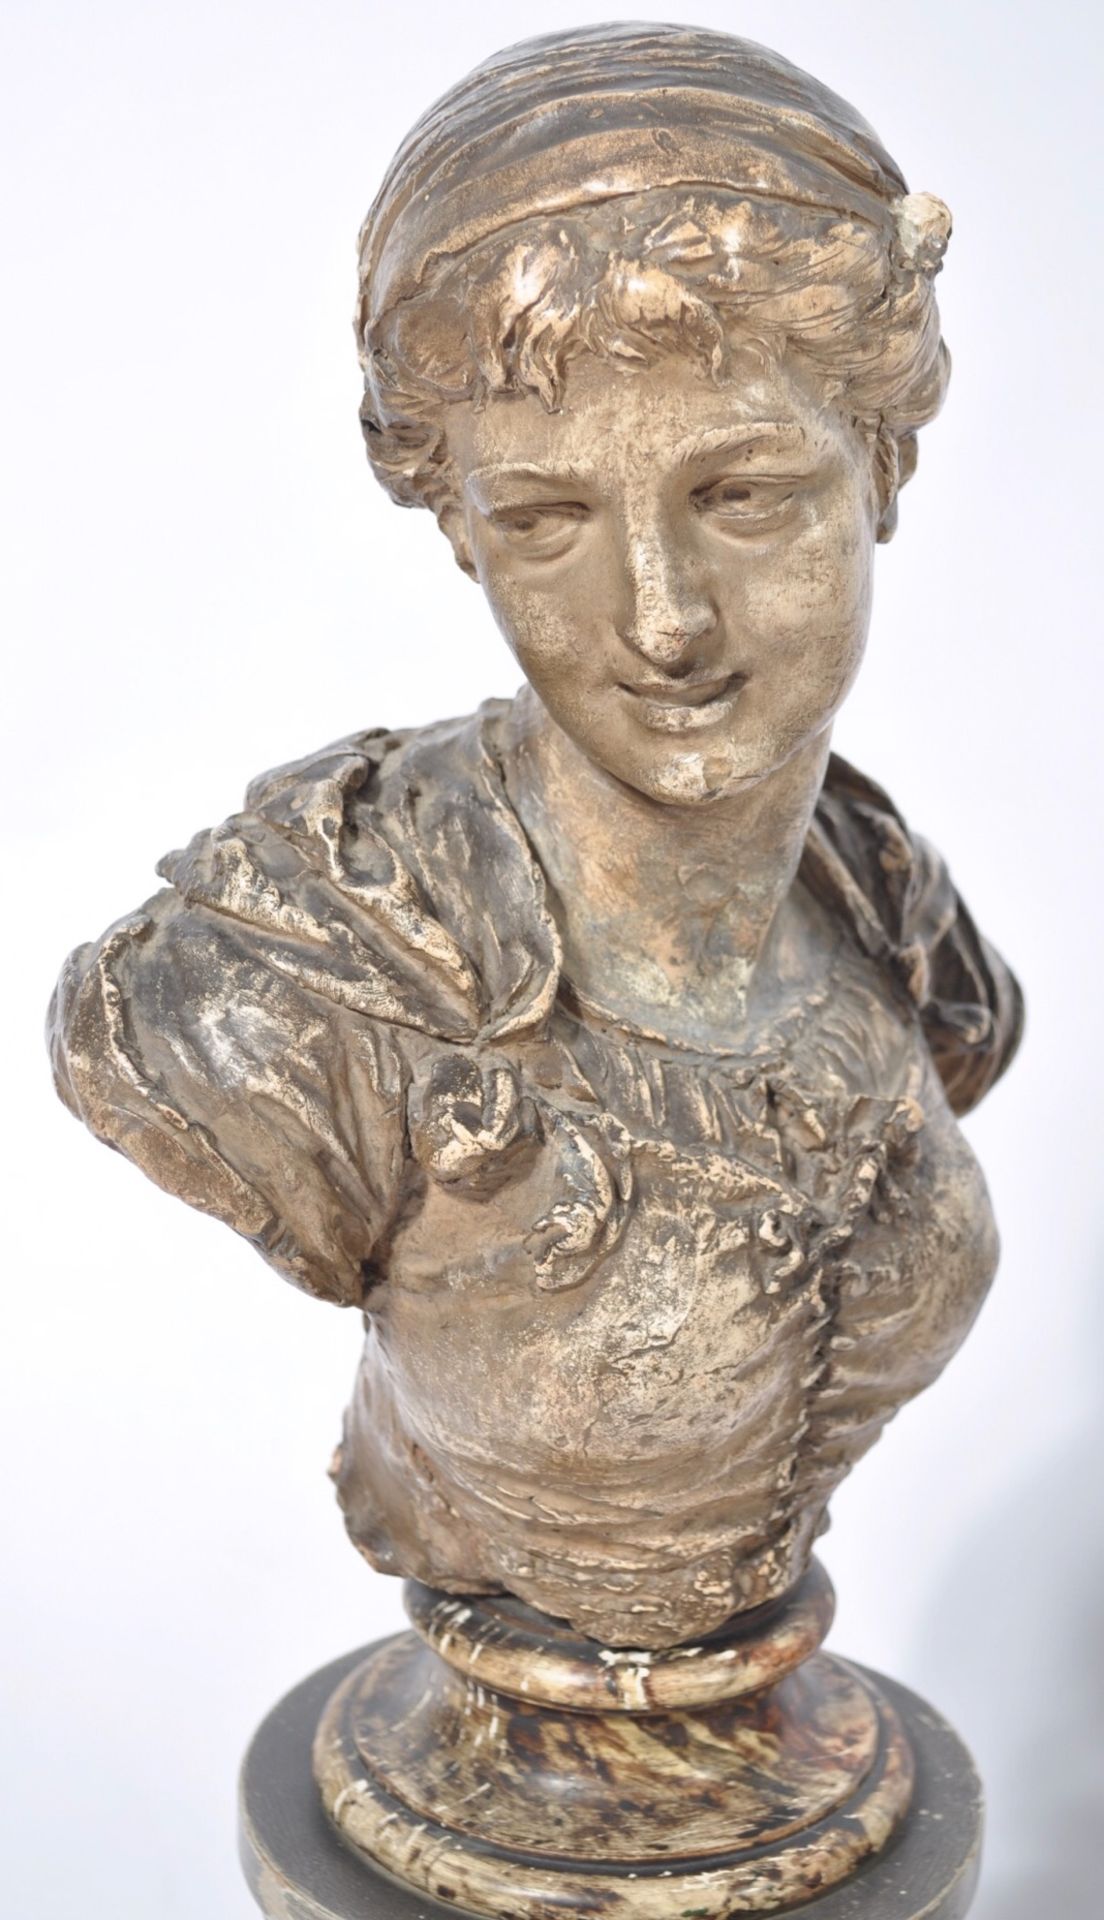 A C19th painted plaster bust on a painted carved wooden plinth - Image 4 of 5